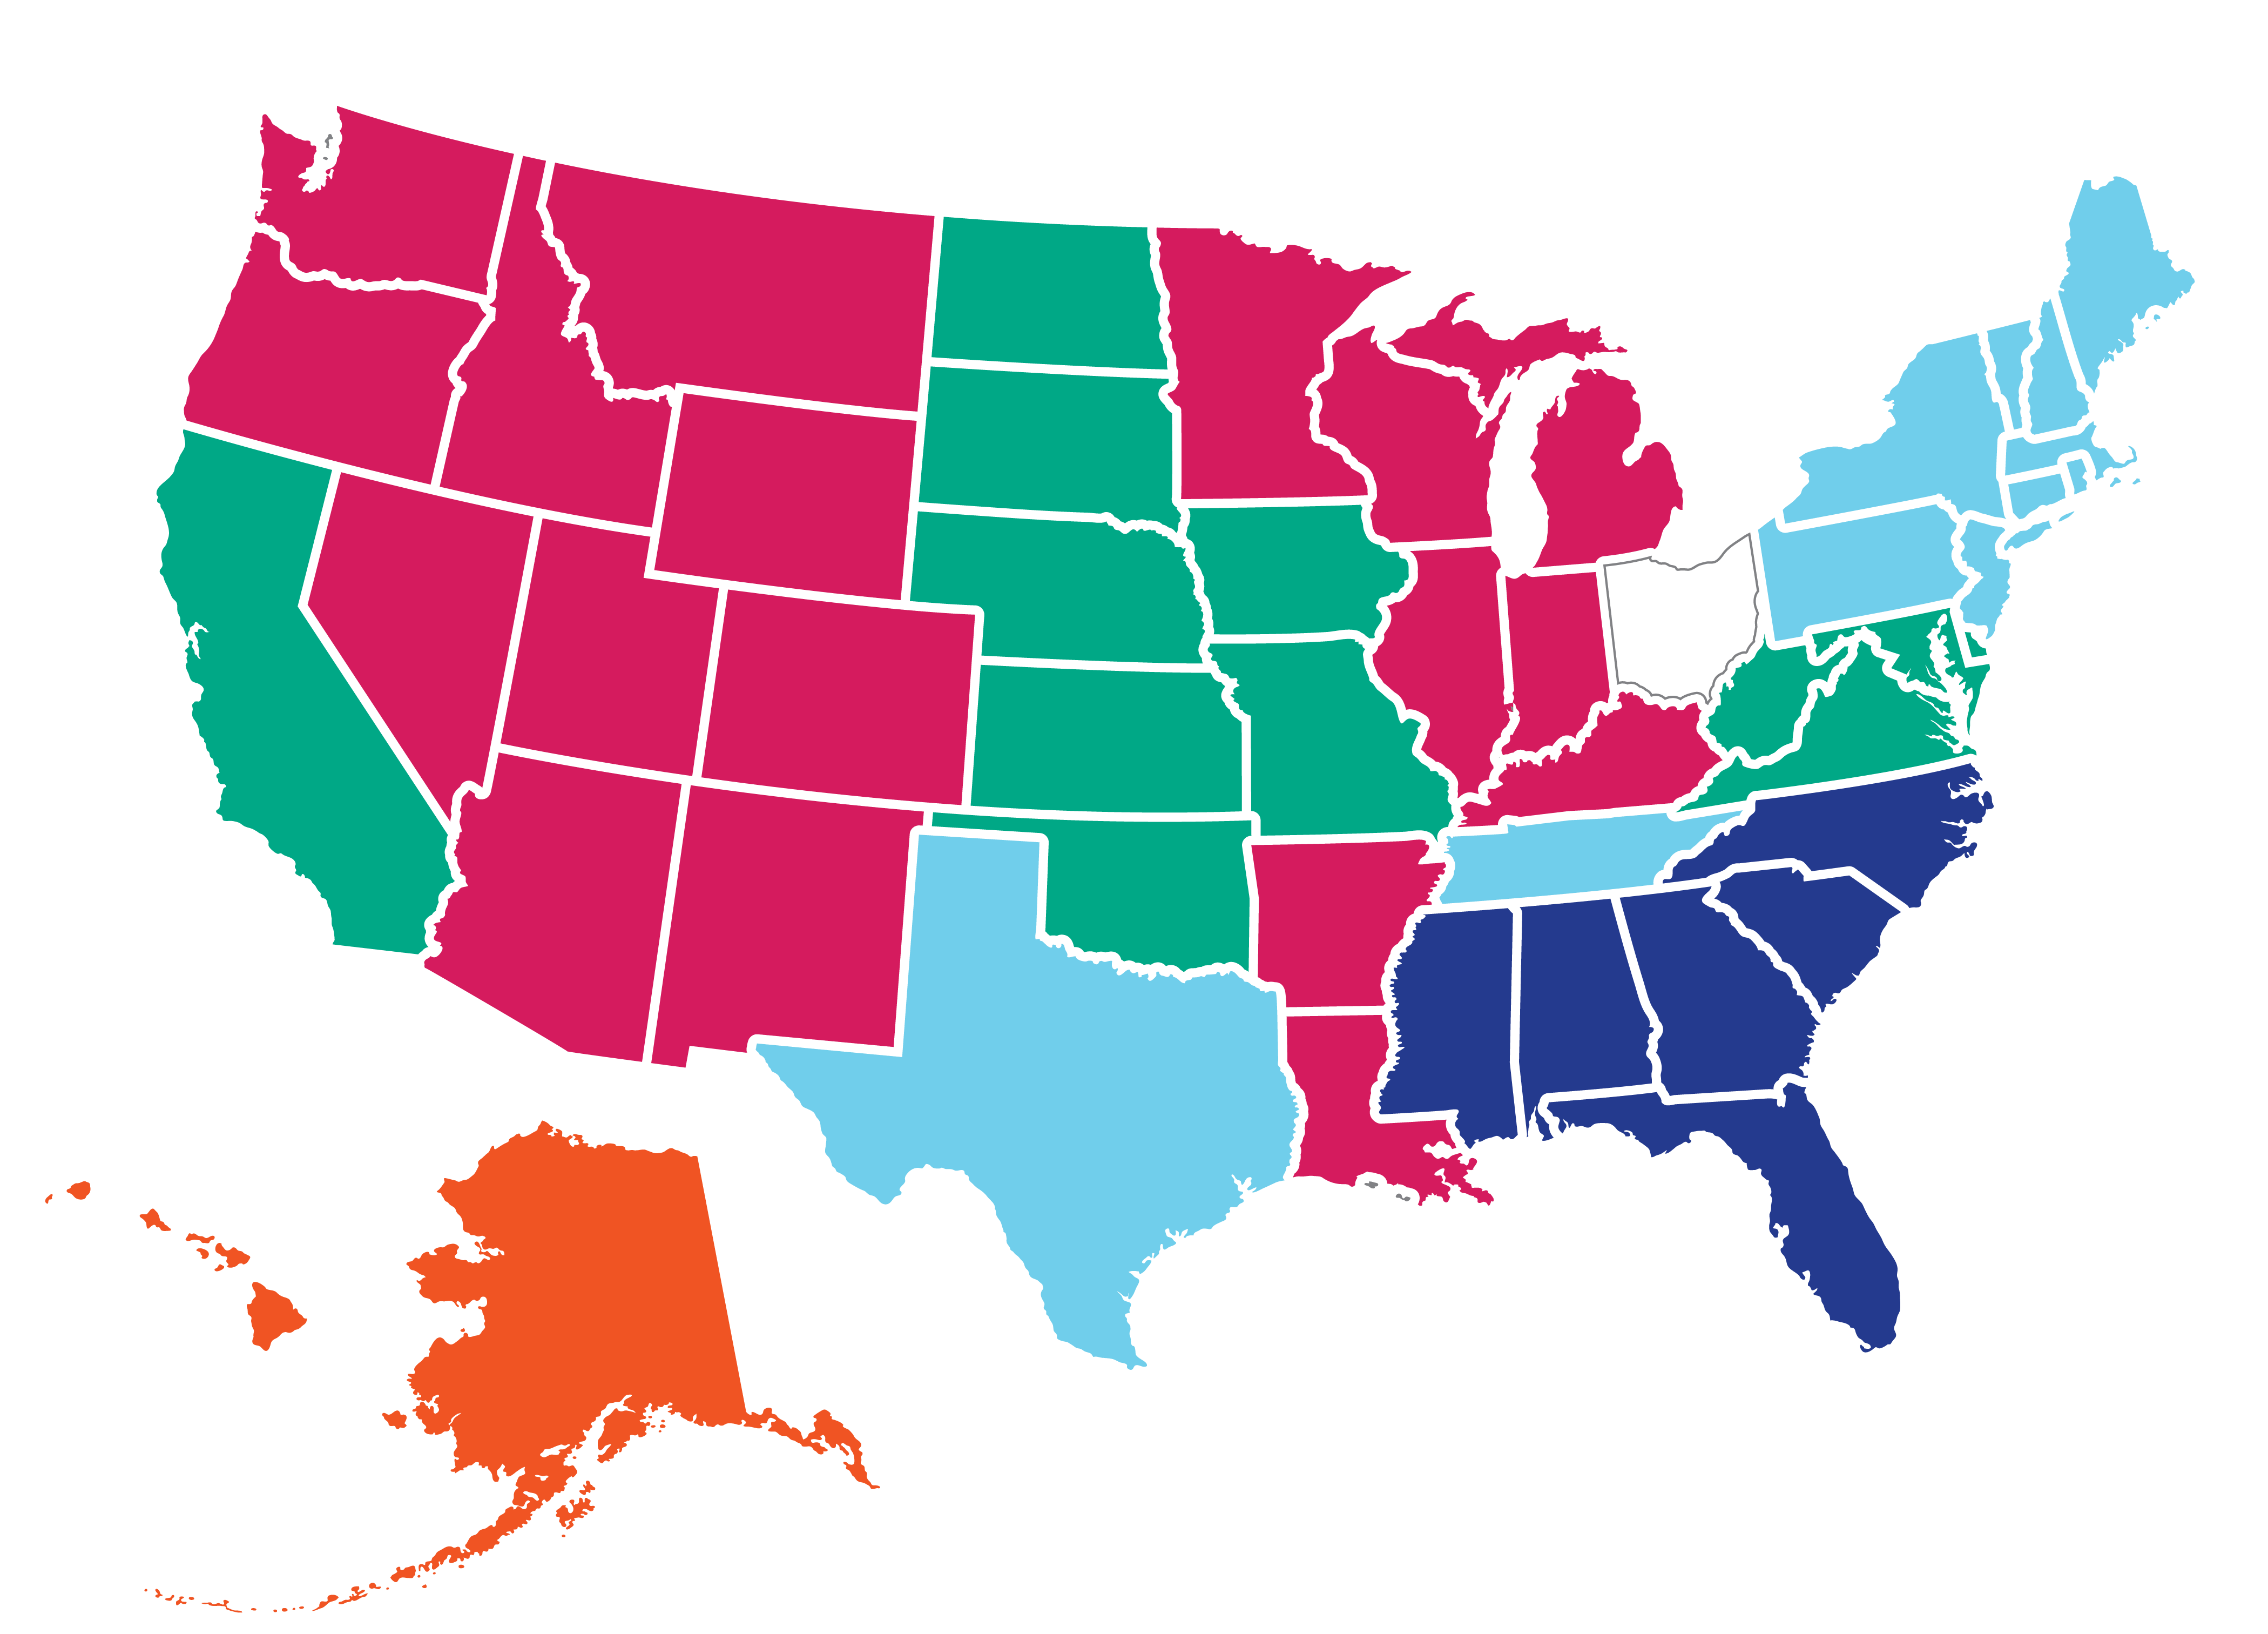 A color coded map of the united states